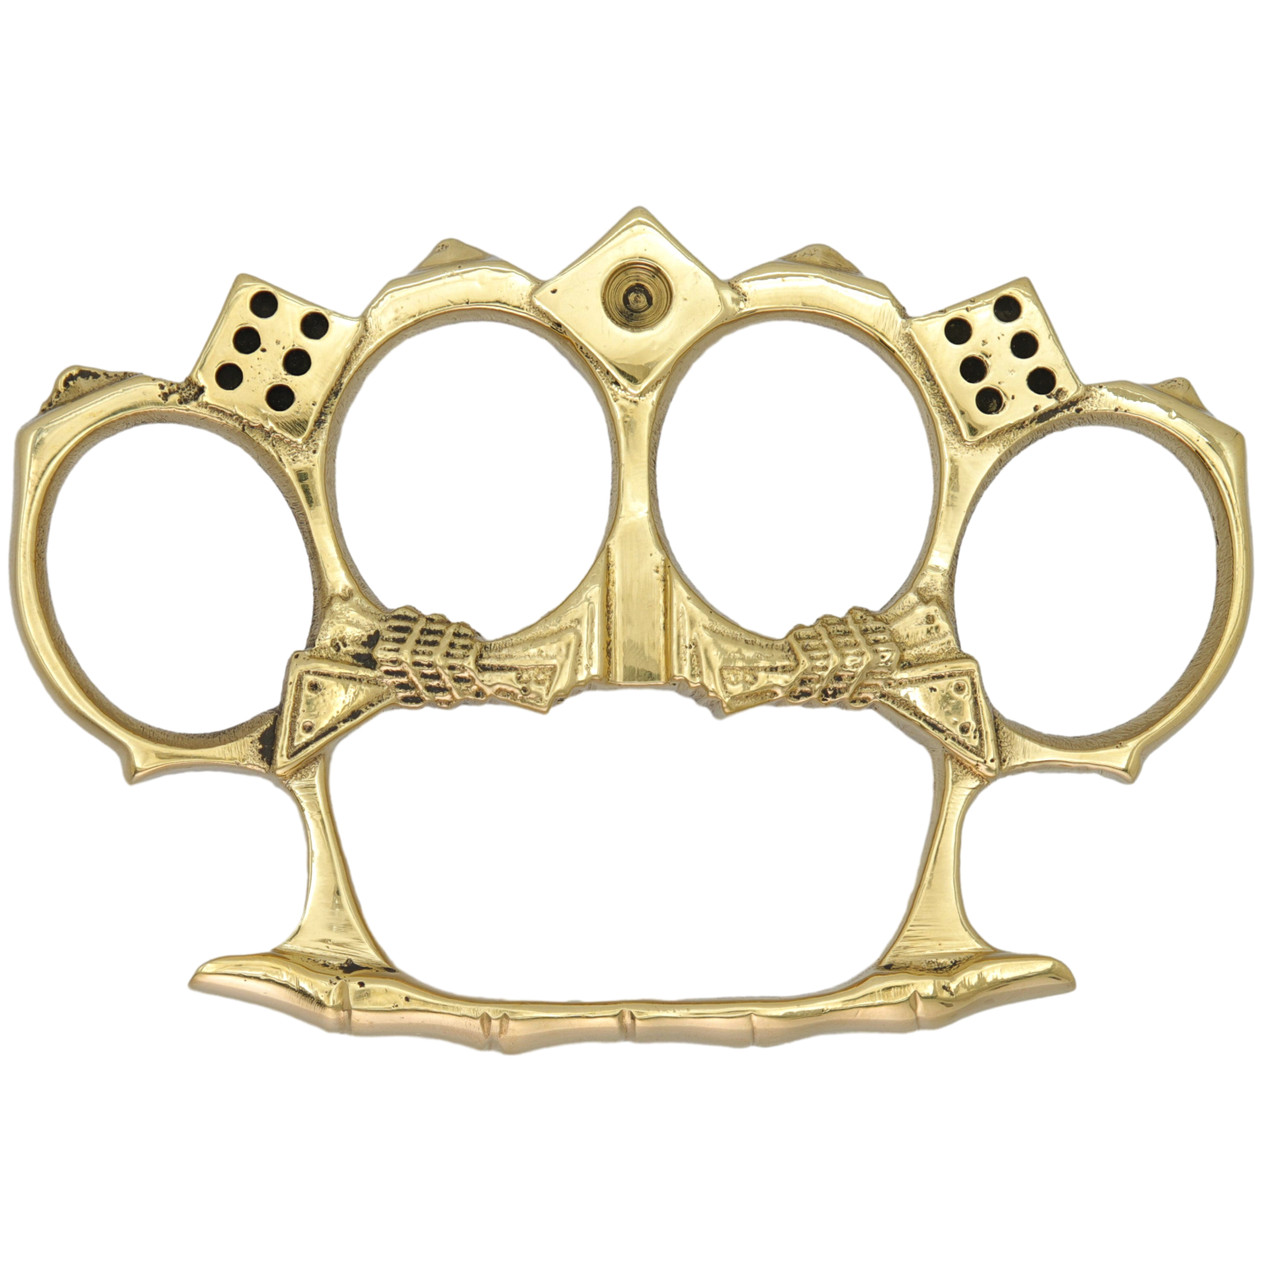 Brass Knuckles: How to Use Them Strategically for Self Defense